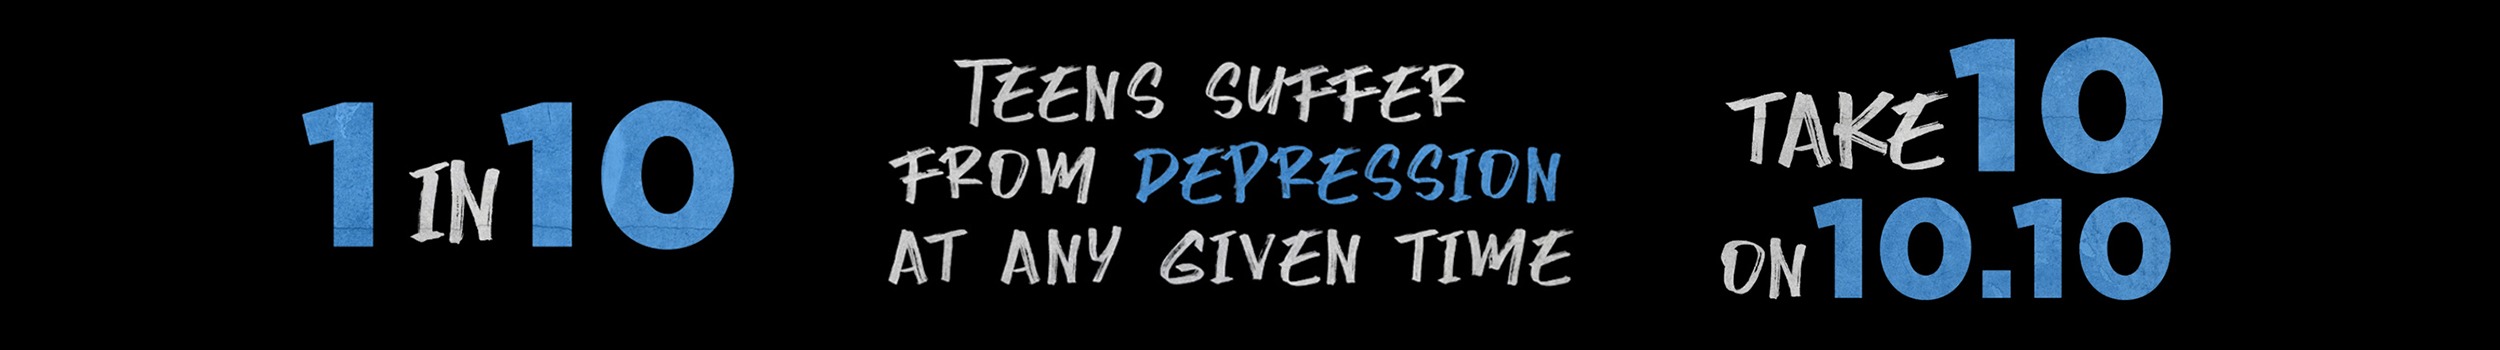 1 in 10 teens suffer from depression at any given time